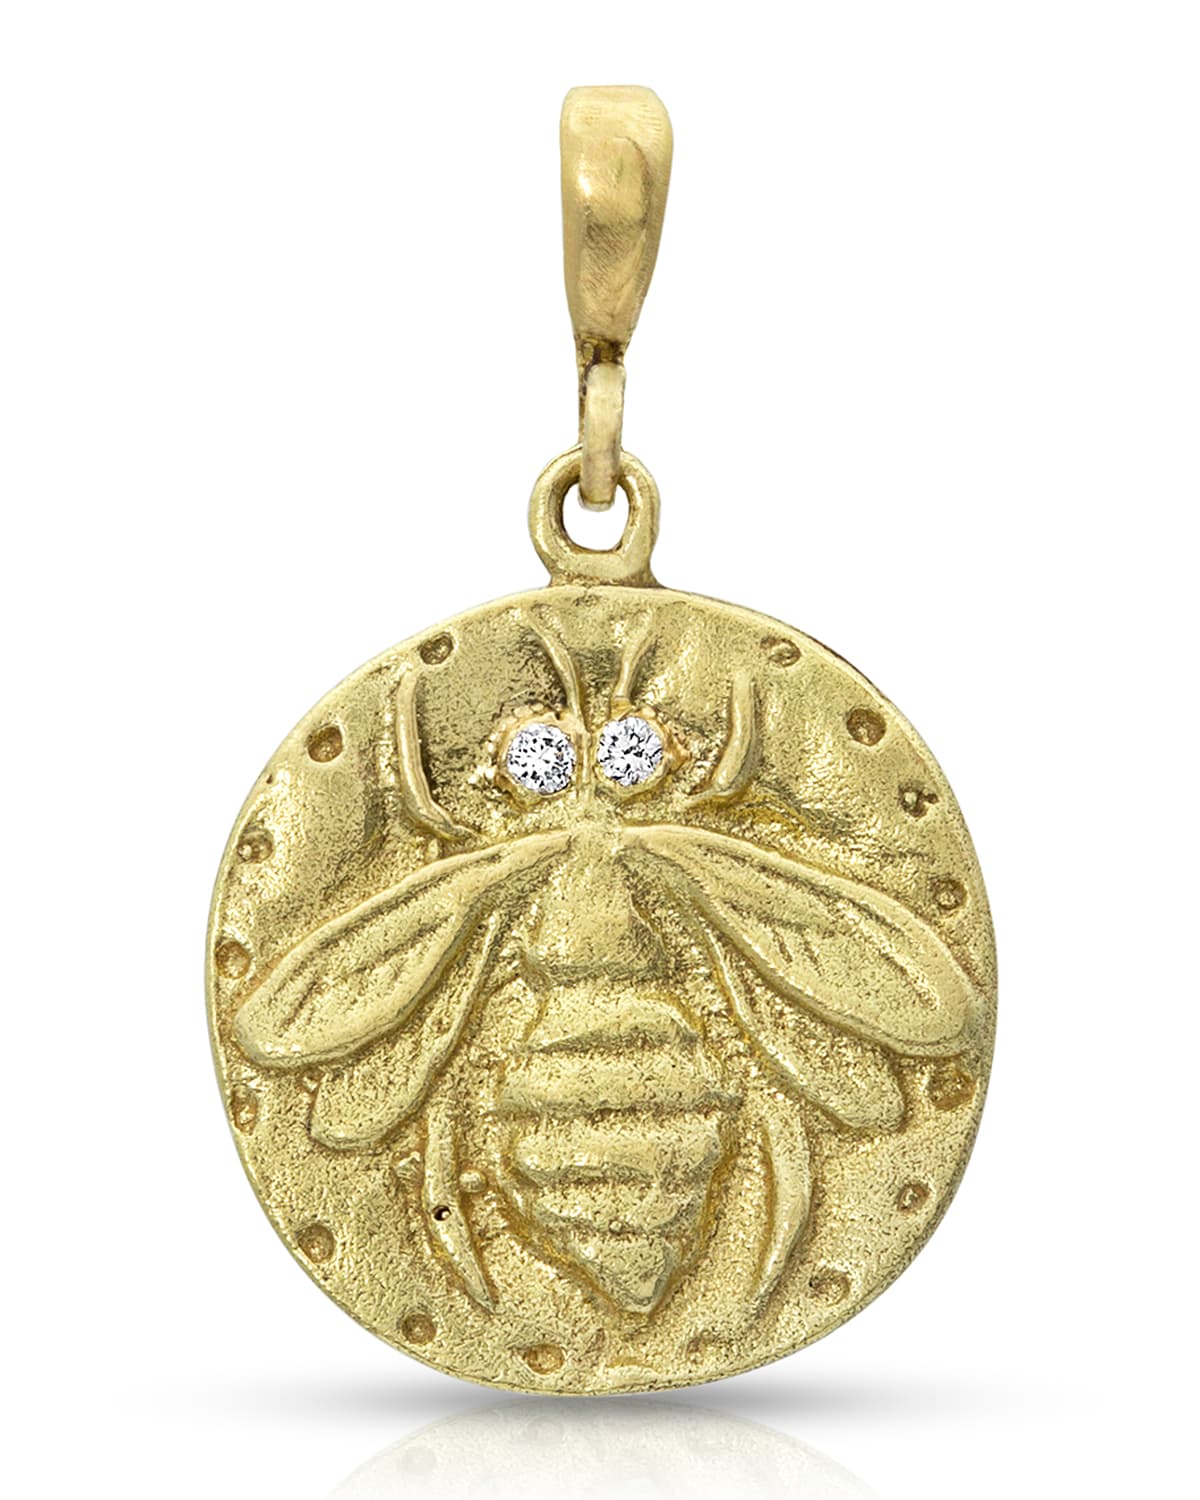 Dominique Cohen 18k Yellow Gold Bee Coin Pendant with Diamond Details